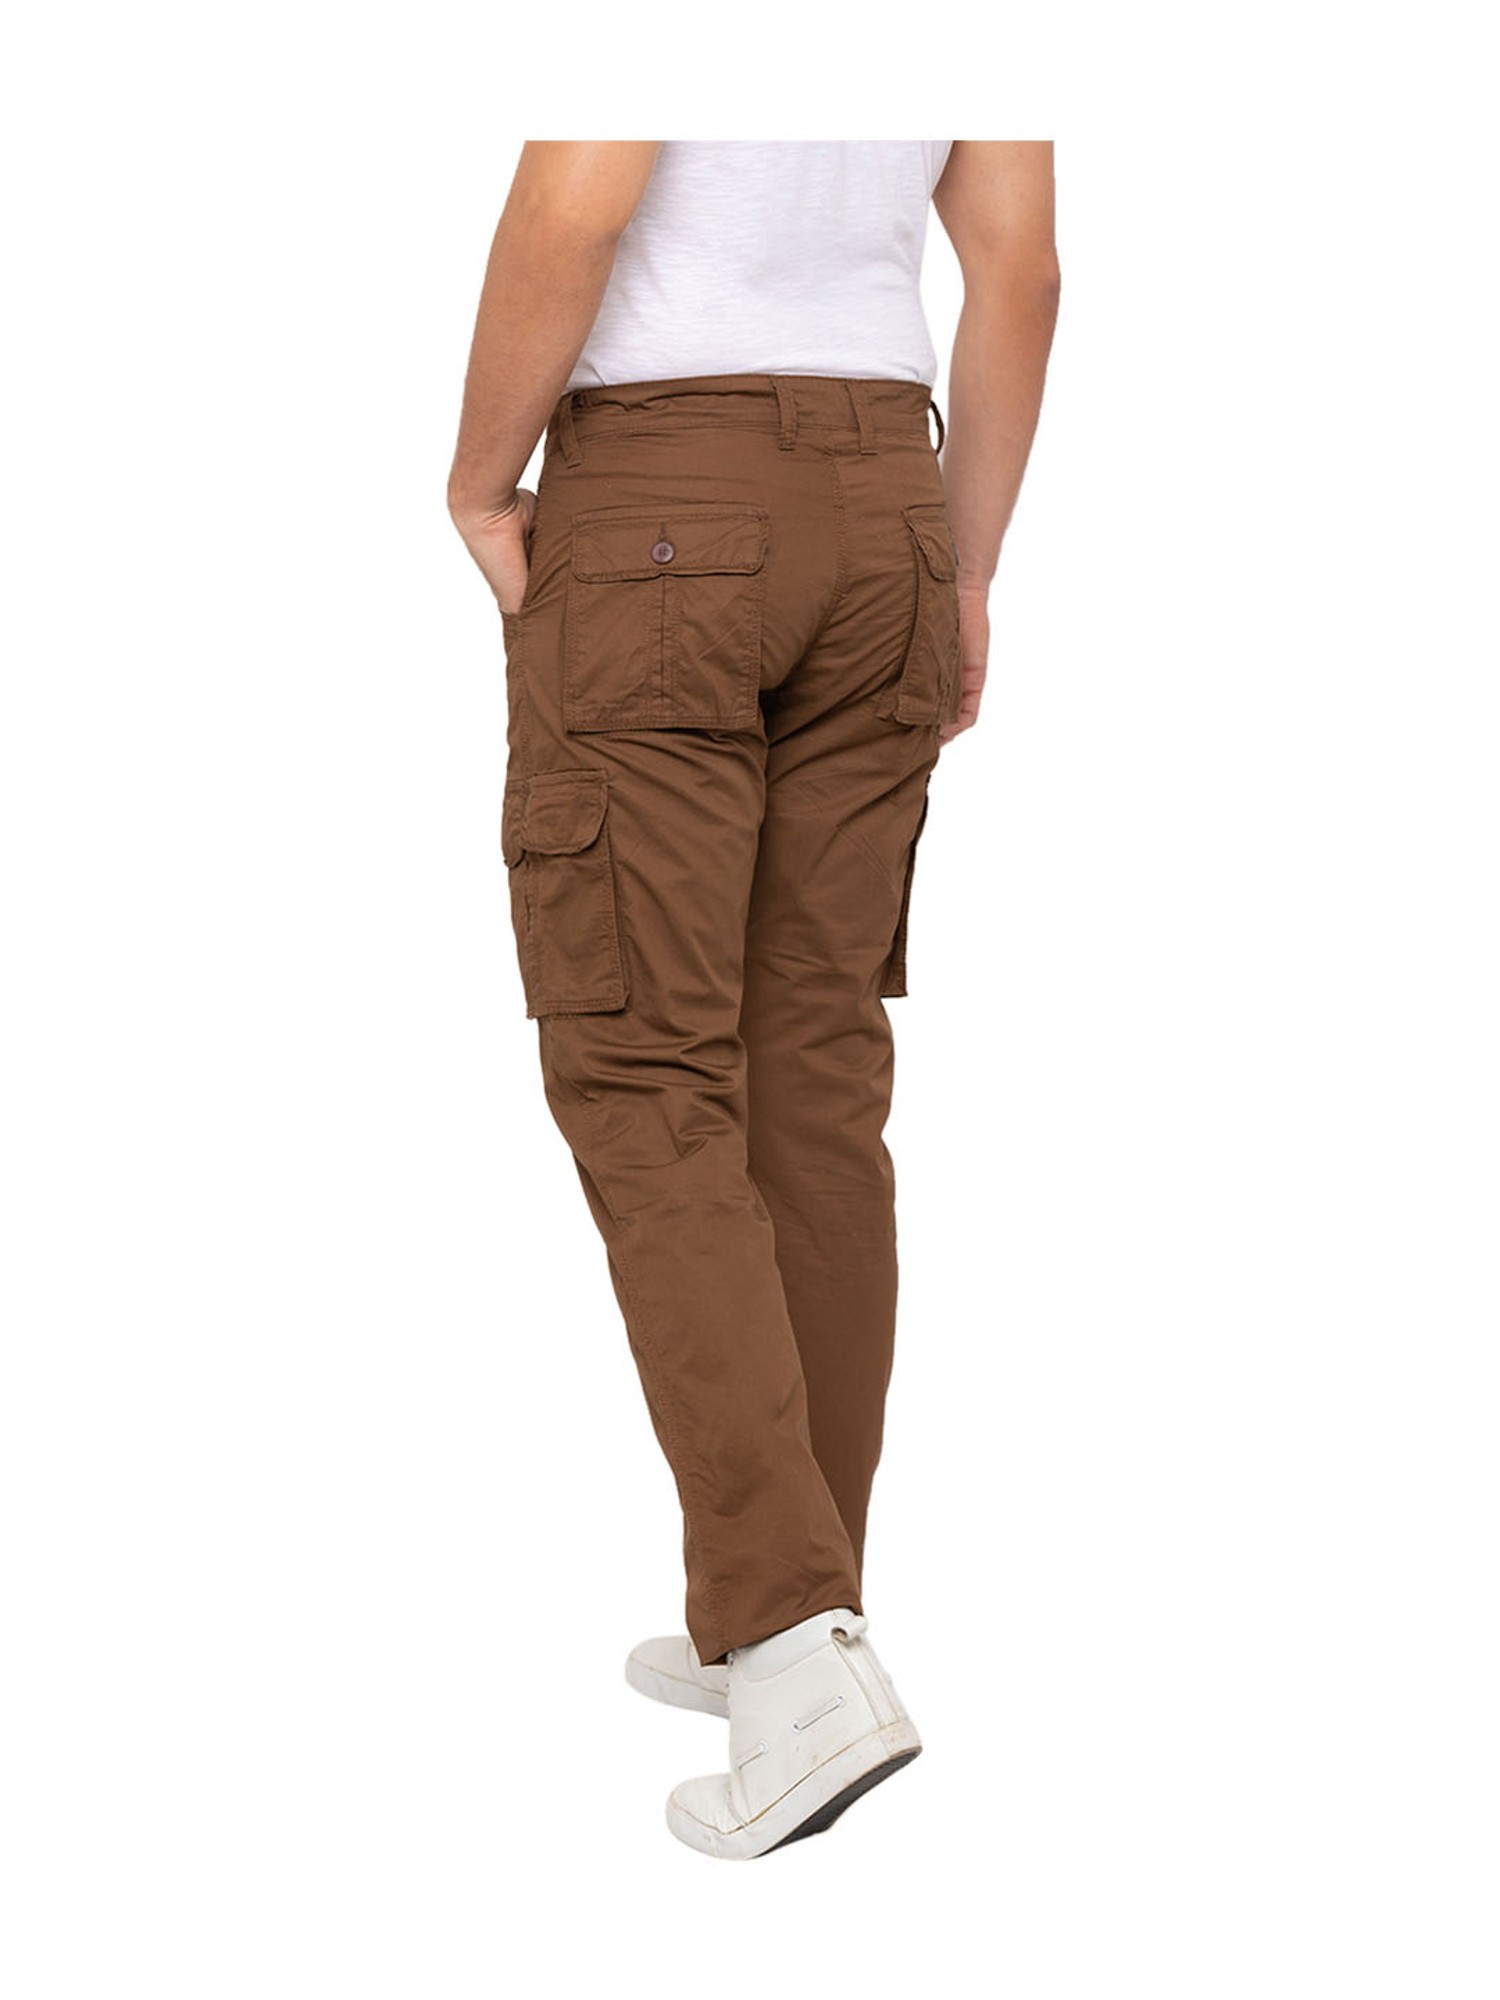 Buy Krystle Mens  Boys Relaxed Fit Cotton Cargo Jogger Jeans Pants  Beige 30 at Amazonin